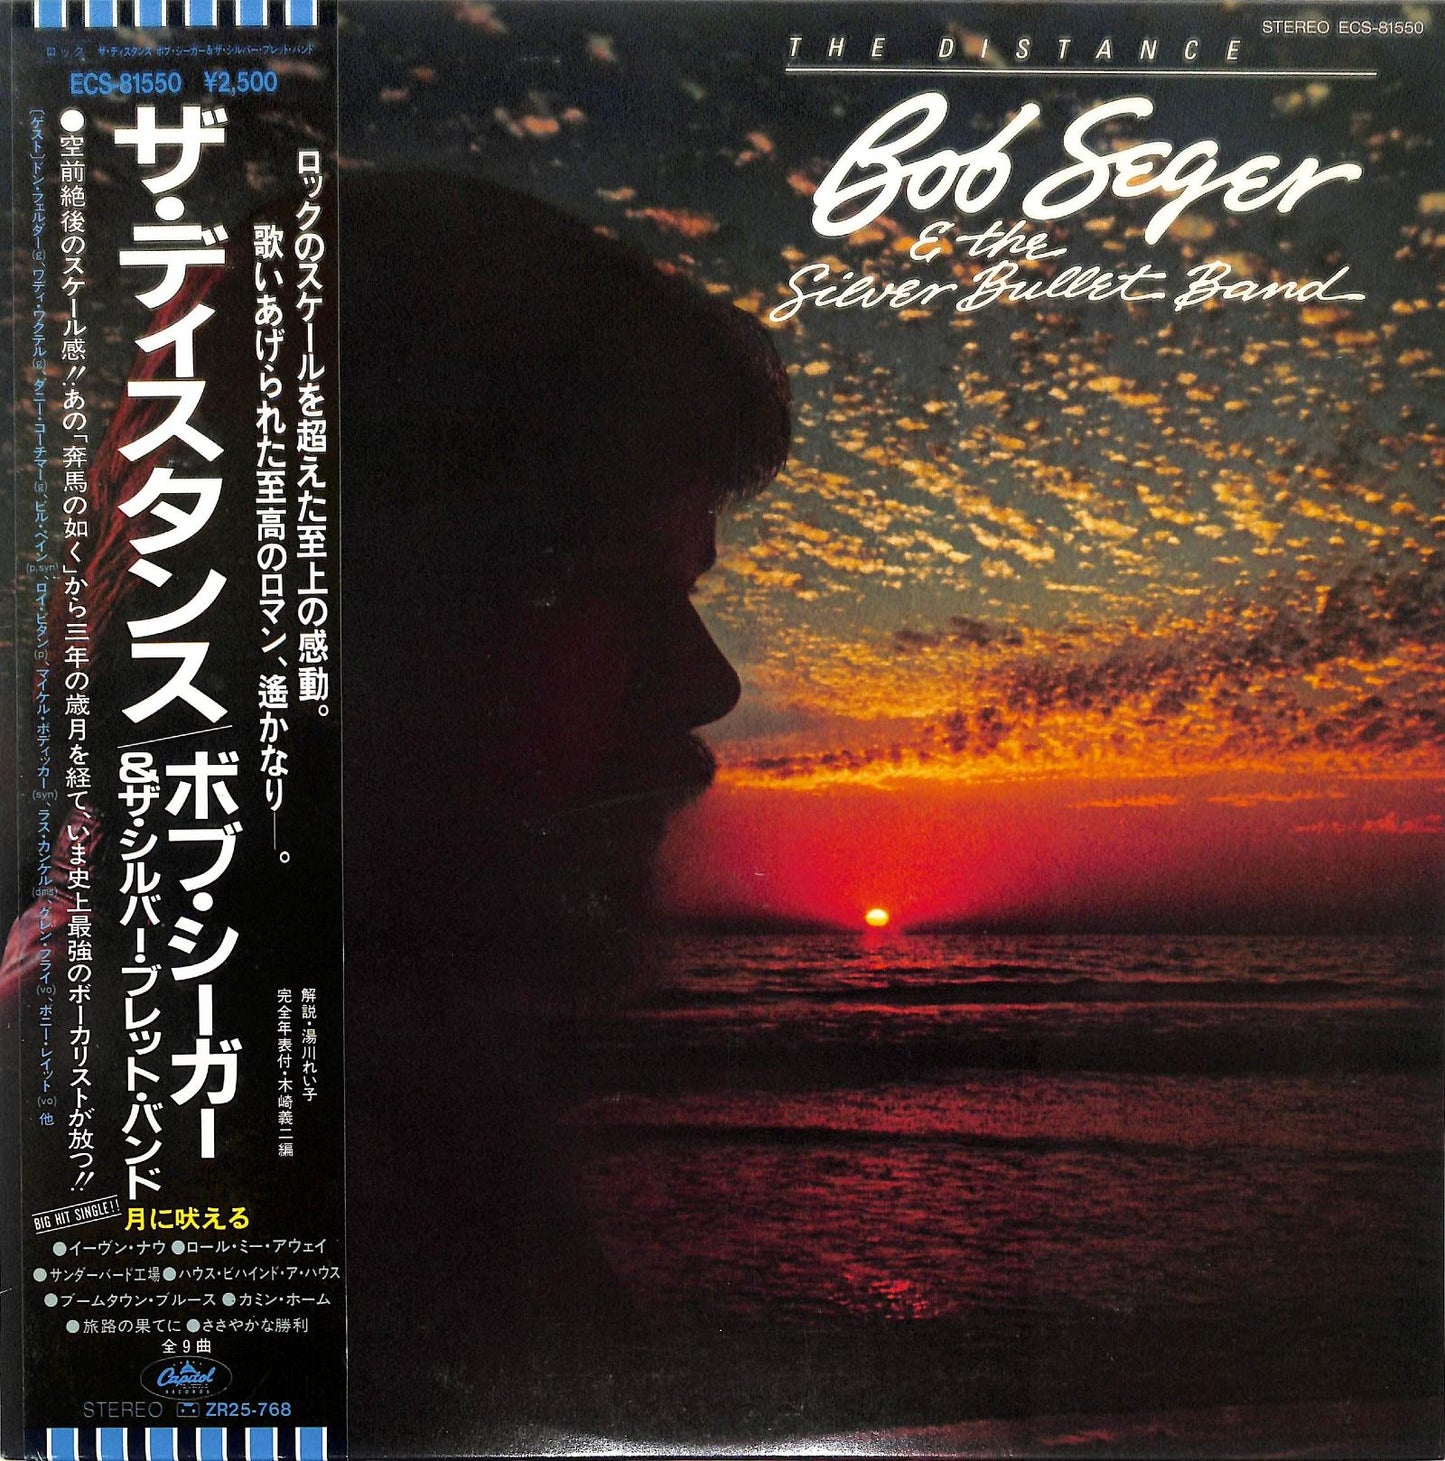 BOB SEGER & THE SILVER BULLET BAND - The Distance